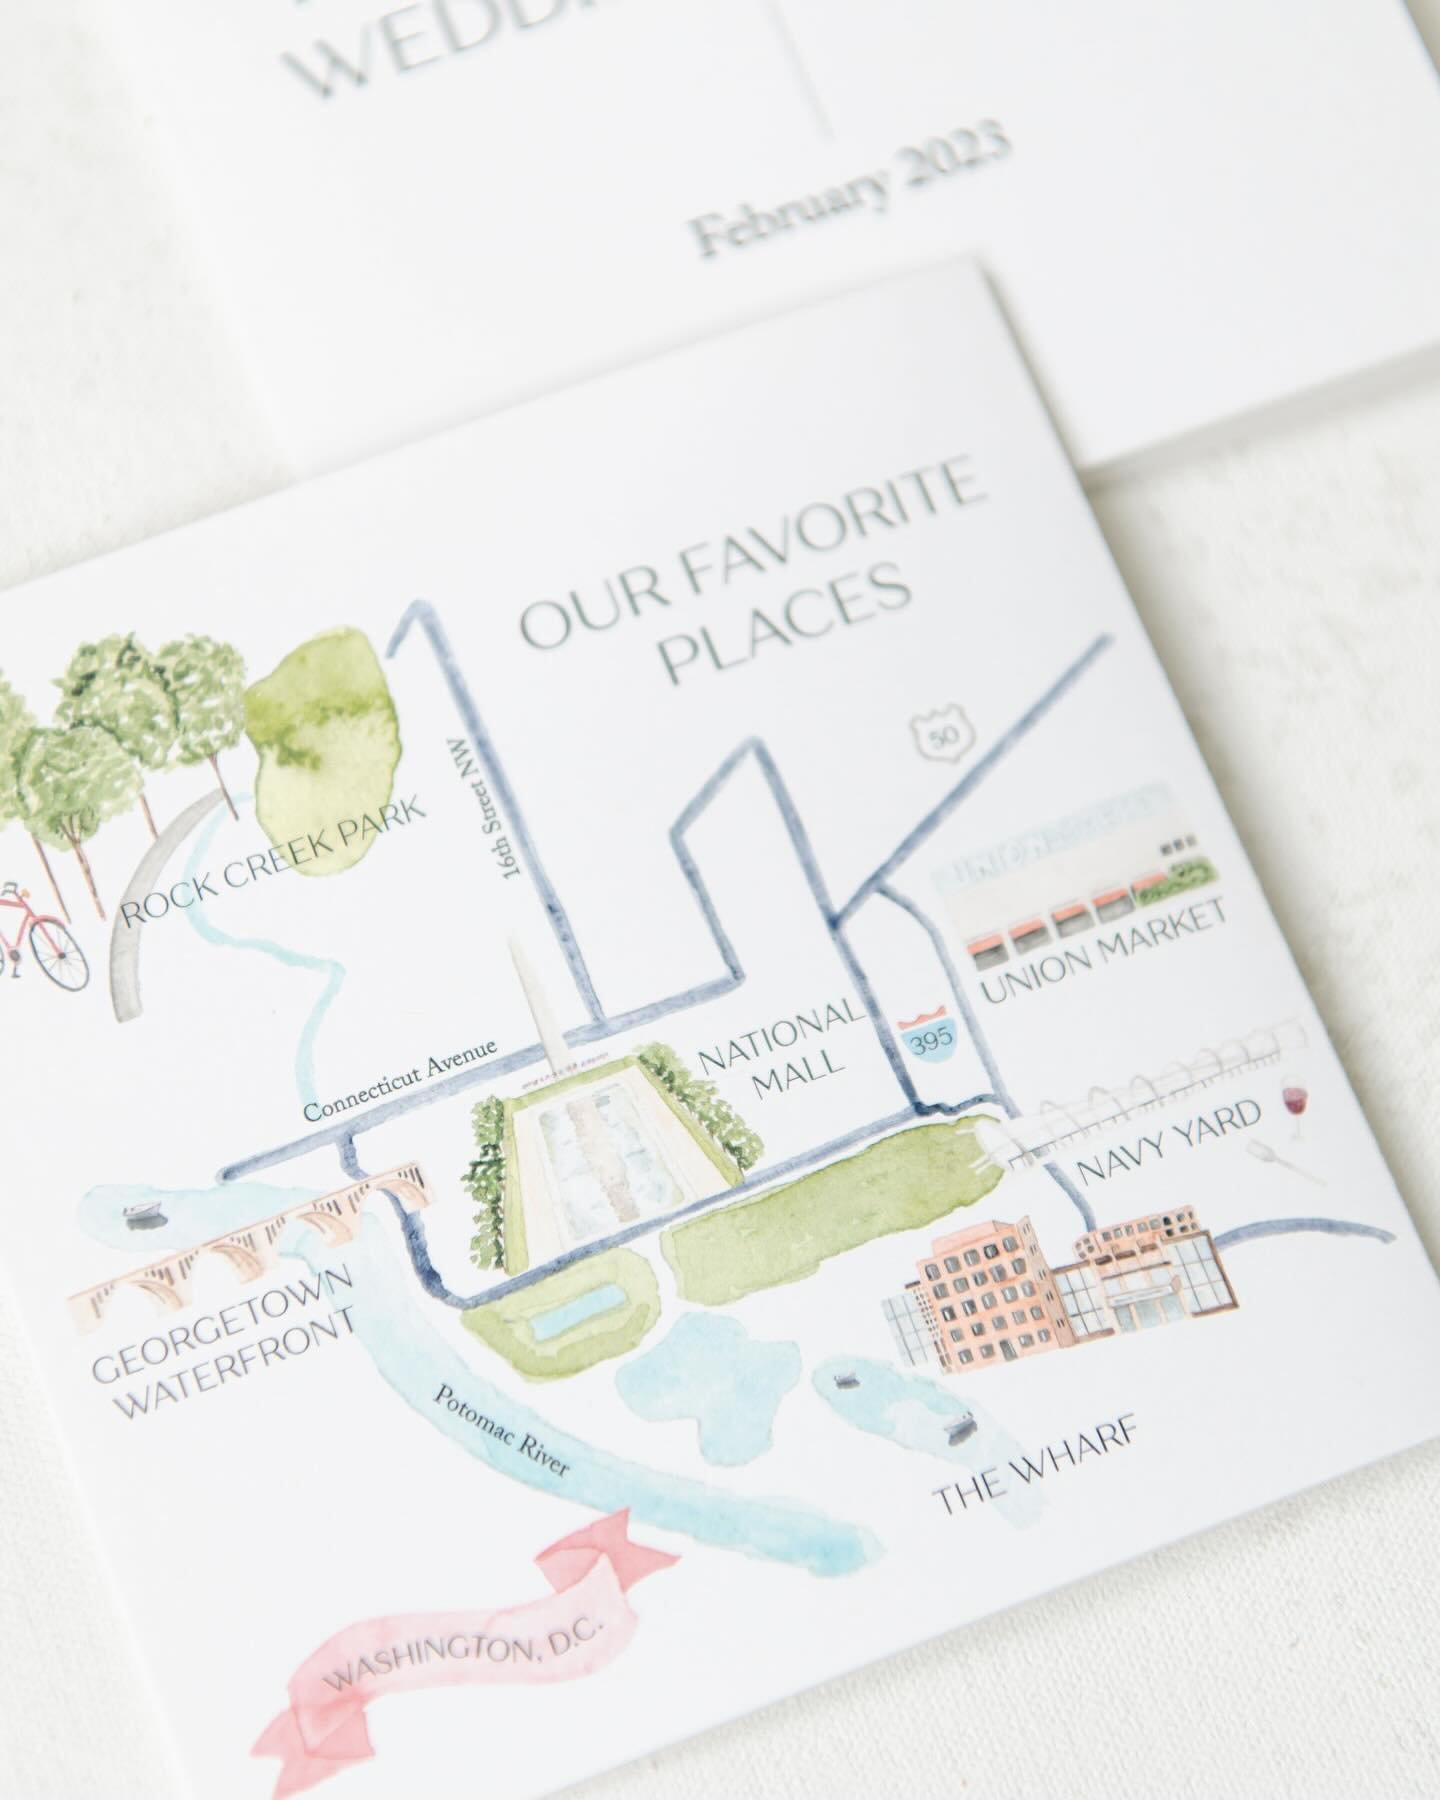 Wedding stationery isn&rsquo;t in my wheel house much these days, but I loved getting to work with K&amp;G last year on their day-of paper. These watercolor illustrations were used for a map of their favorite spots in D.C. + a fun weekend itinerary f